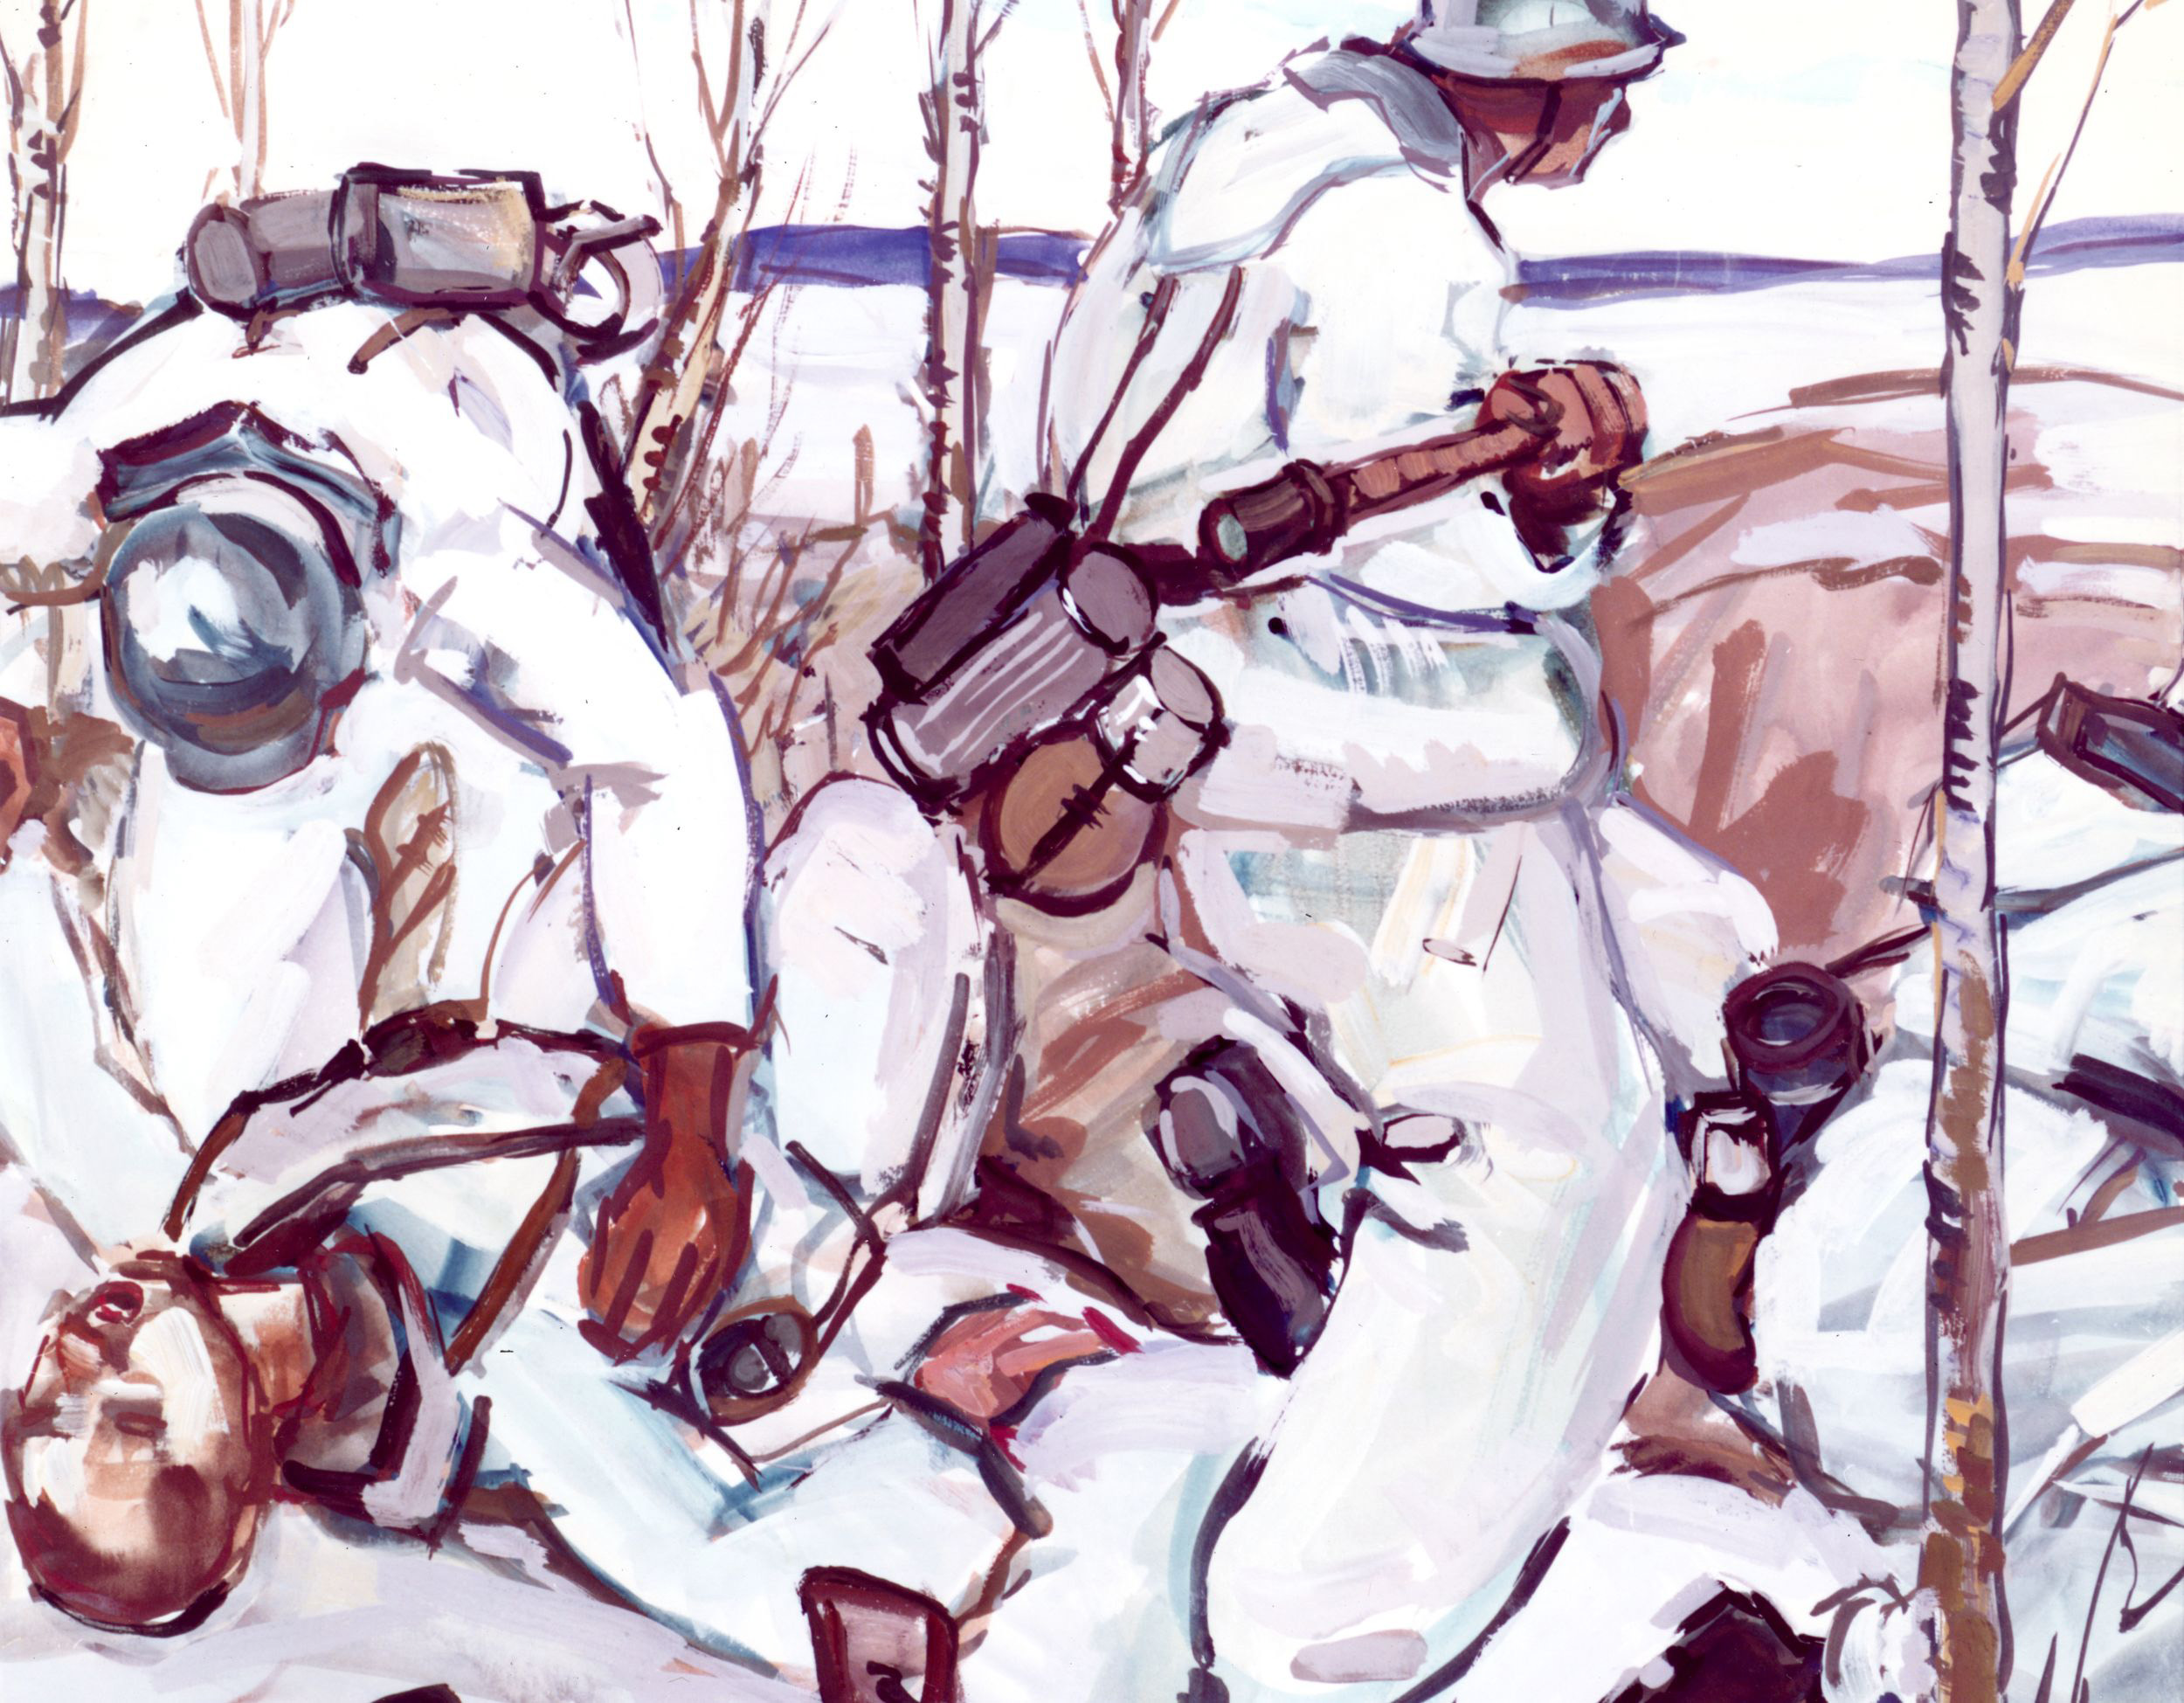 In a watercolor painted during the Murmansk fighting, Wehrmacht artist Emil Rizek depicts camouflaged German soldiers, one preparing to throw a grenade while the other tends to a wounded comrade. 